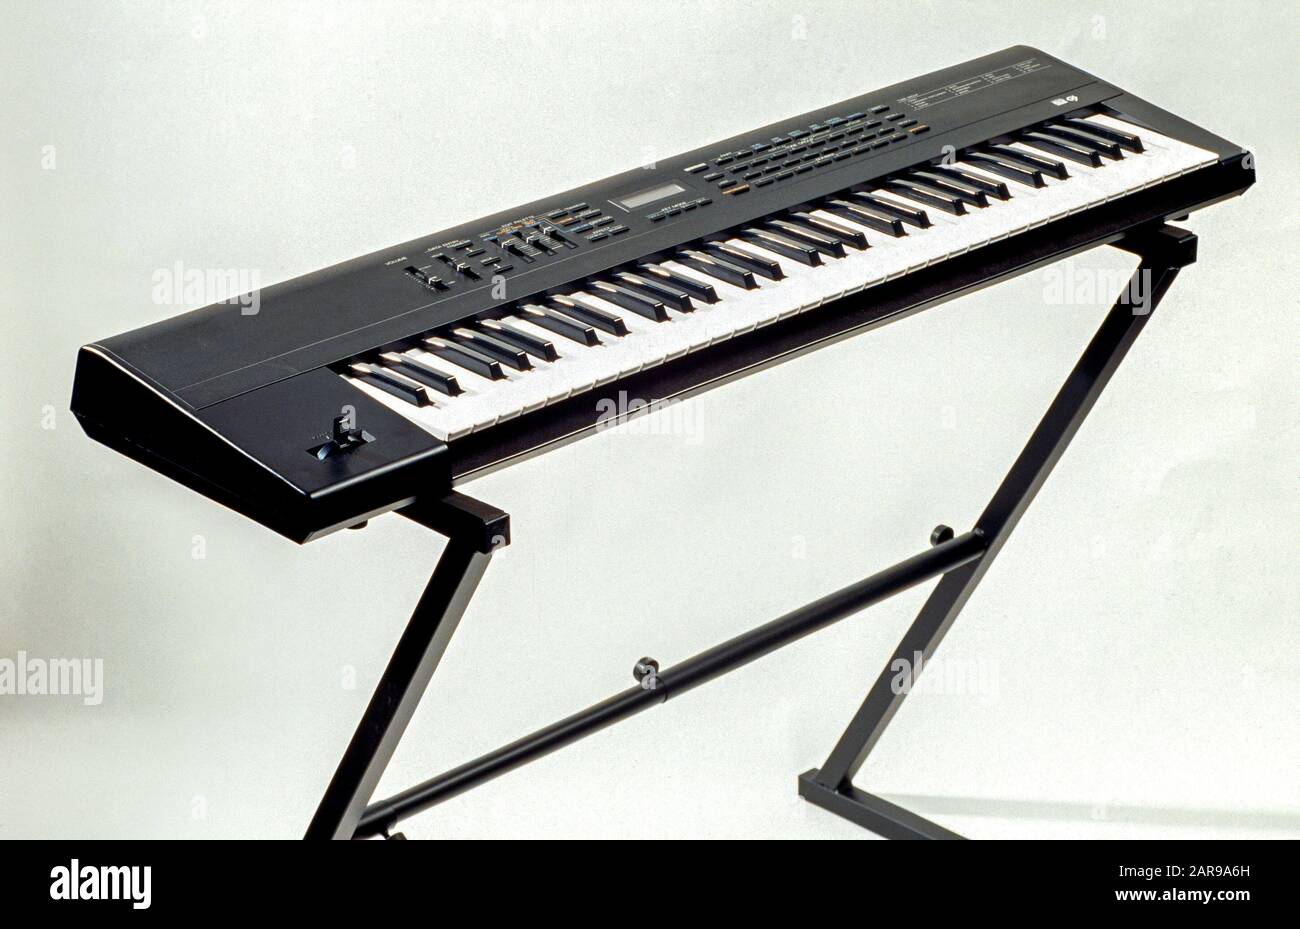 An electronic keyboard or digital keyboard is an electronic musical instrument, an electronic or digital derivative of keyboard instruments. Electronic keyboards are capable of recreating a wide range of instrument sounds (piano, electric piano, Hammond organ, pipe organ, violin, etc.) and synthesizer tones with less complex sound synthesis. Stock Photo